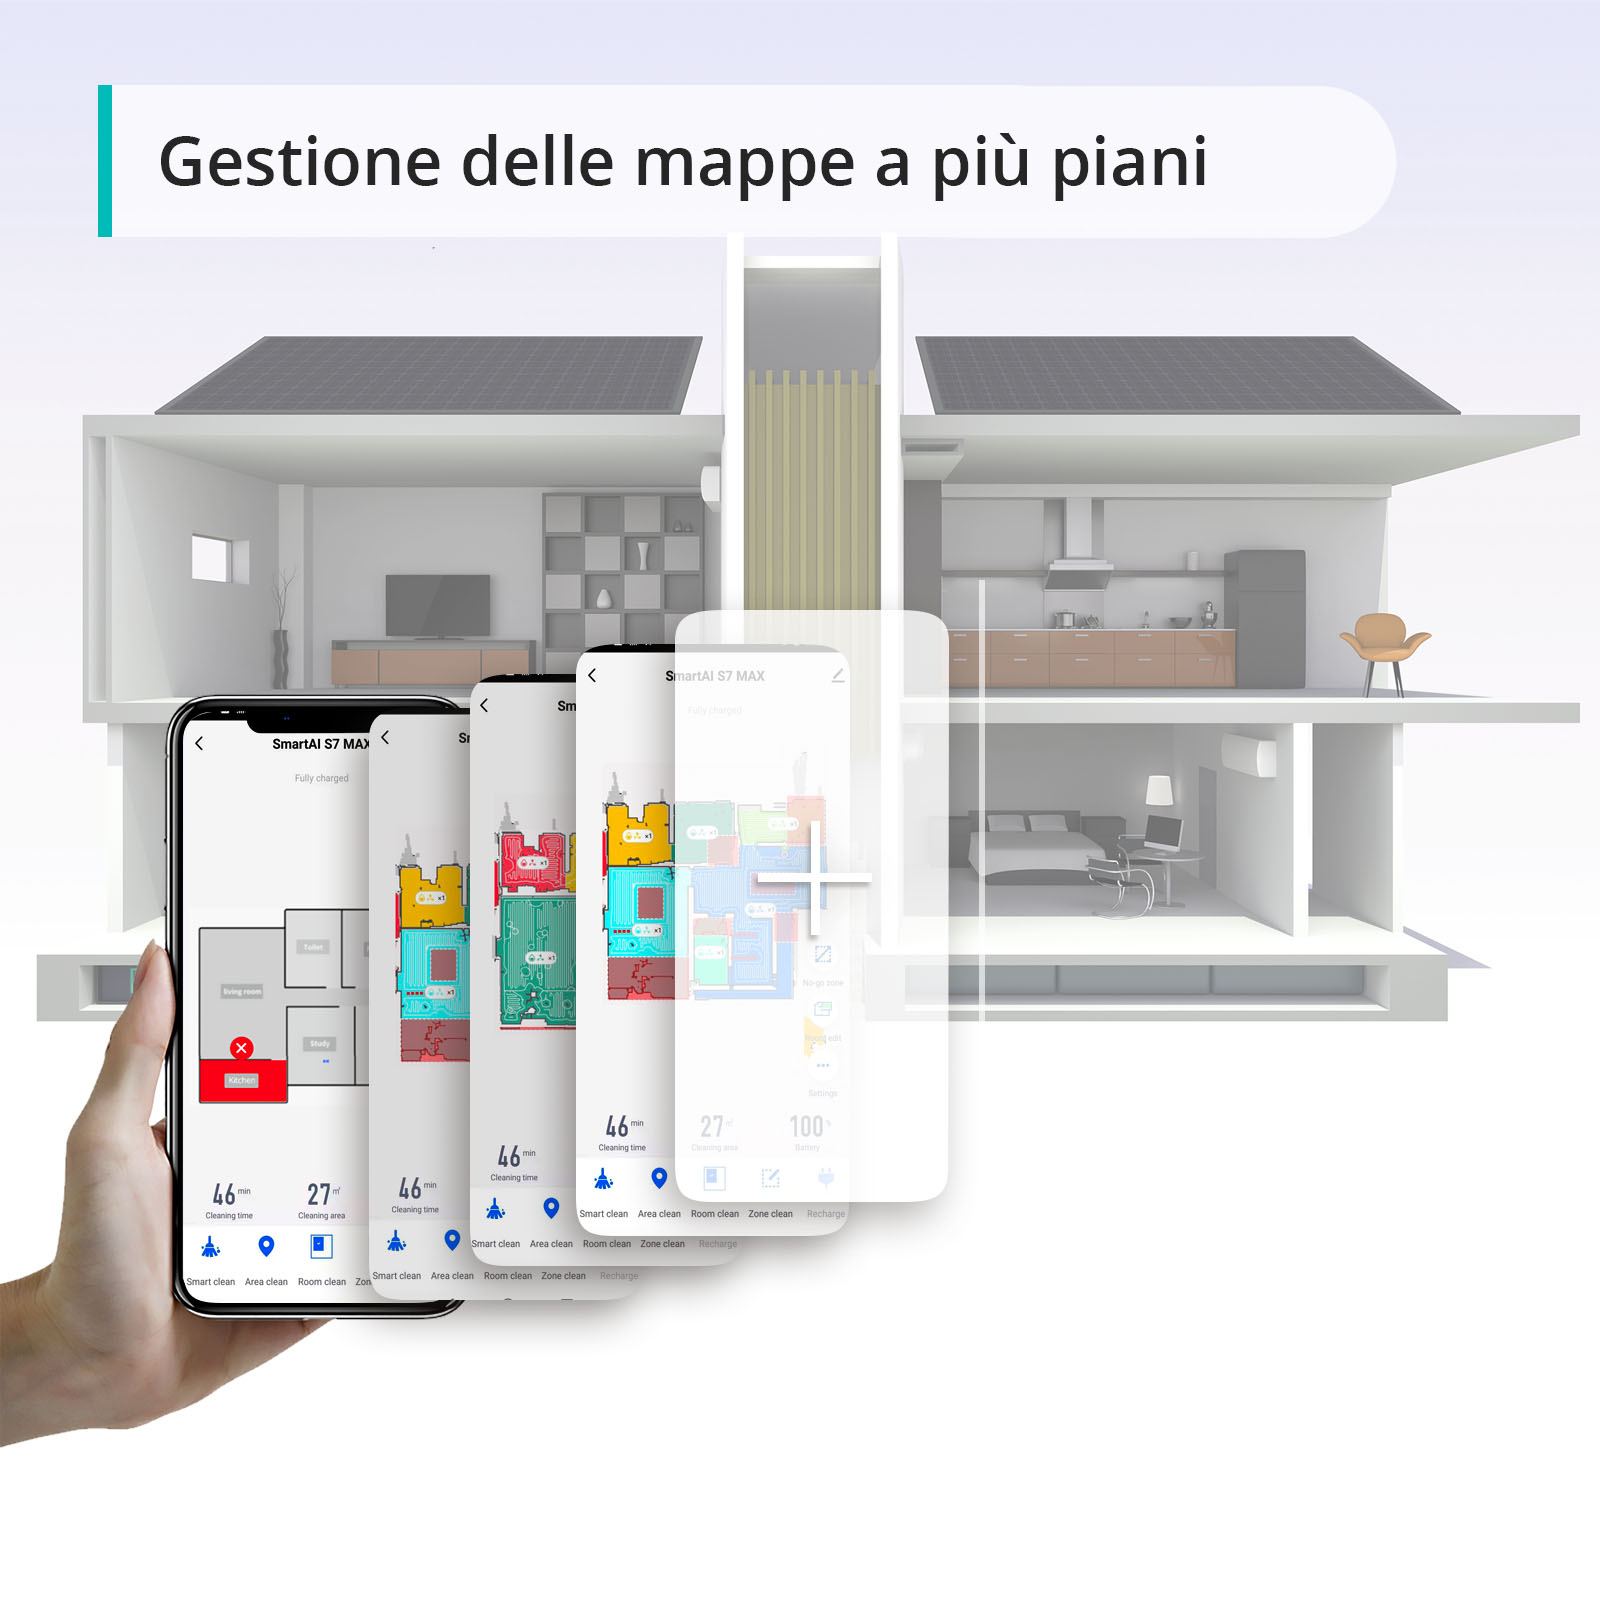 Gestione delle mappe